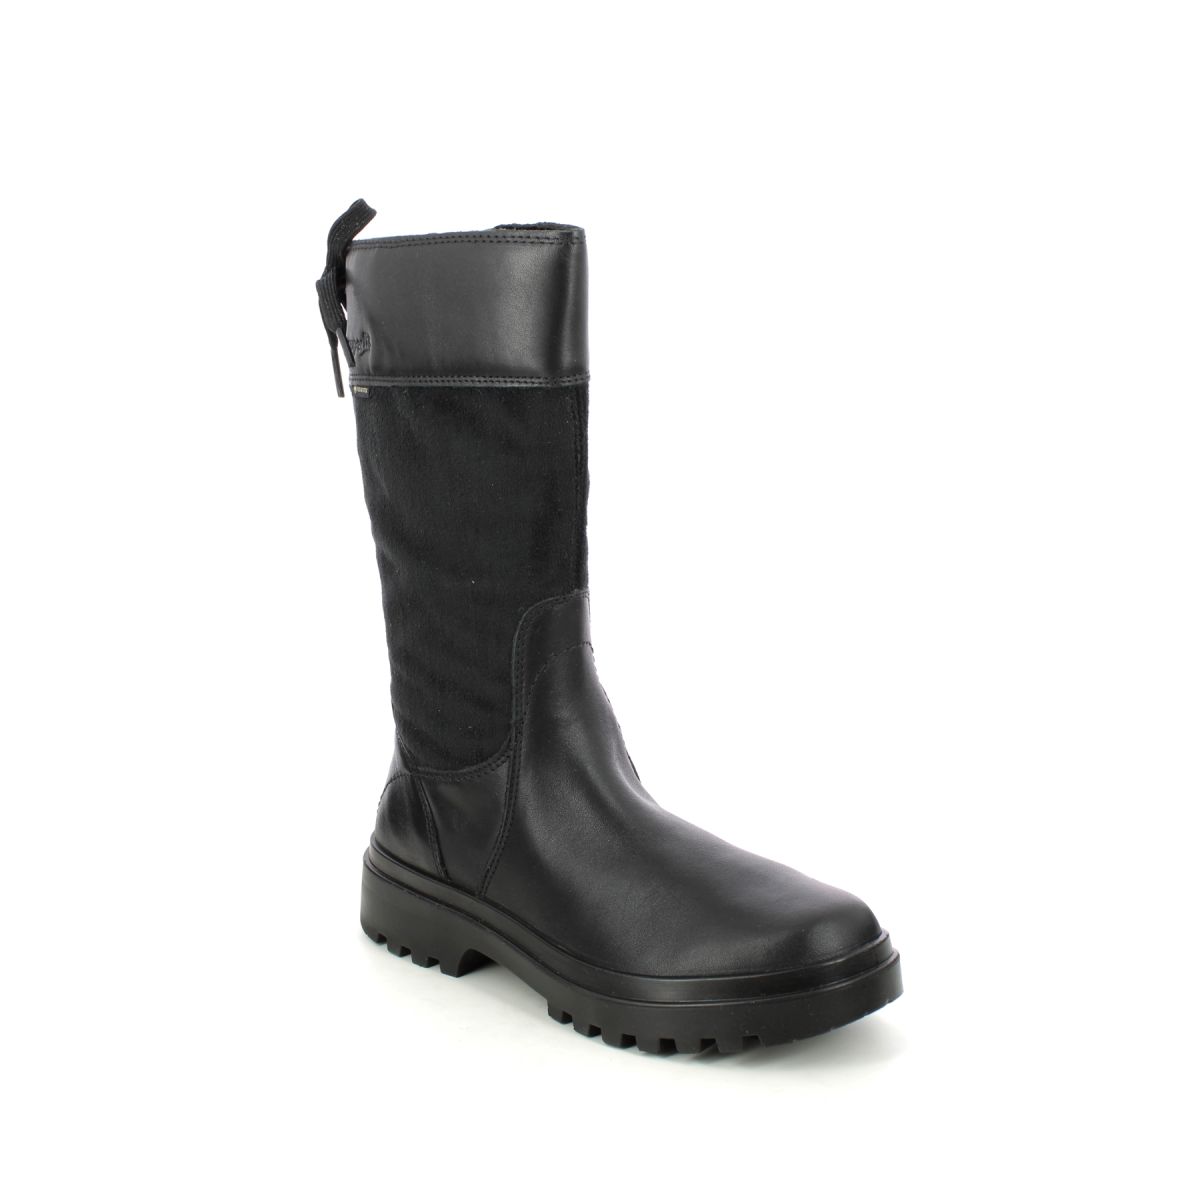 Superfit Abby Long Gtx Black Leather Kids Girls Boots 1000605-0000 In Size 39 In Plain Black Leather For kids